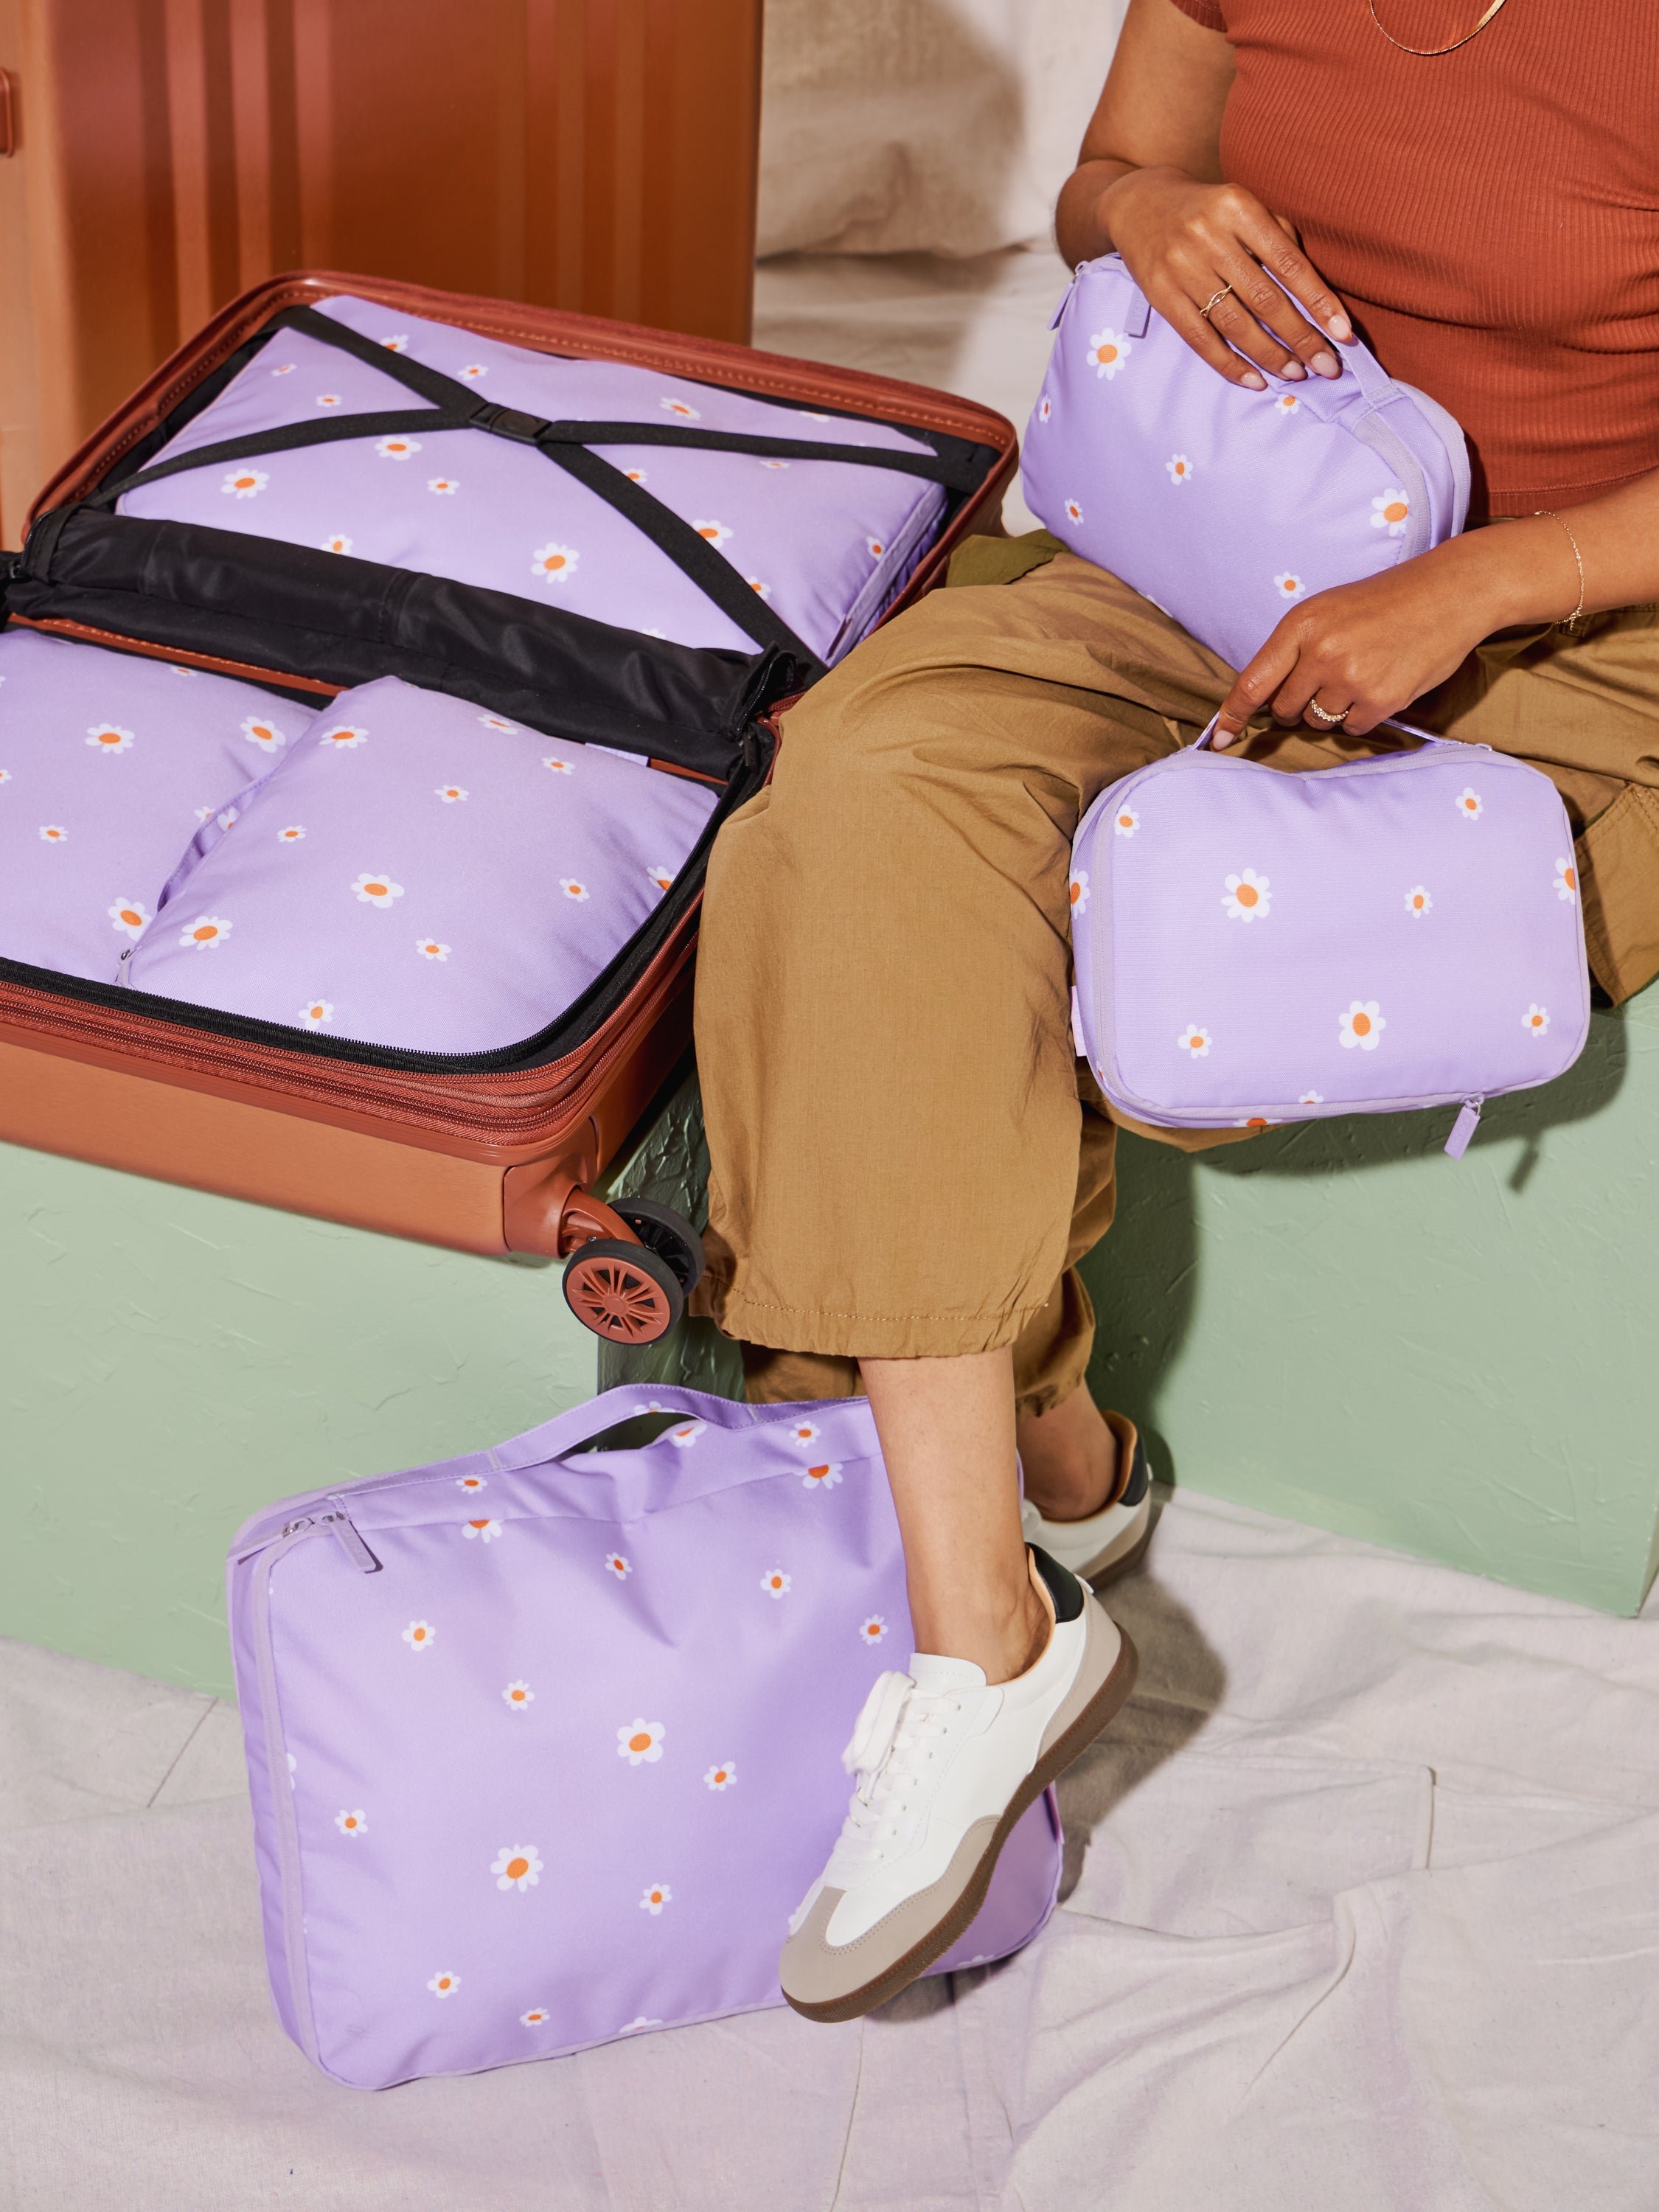 Model sitting besides suitcase packed with CALPAK Large Compression Packing Cubes and Medium Compression Packing Cubes while holding Small Compression Packing Cubes in orchid fields